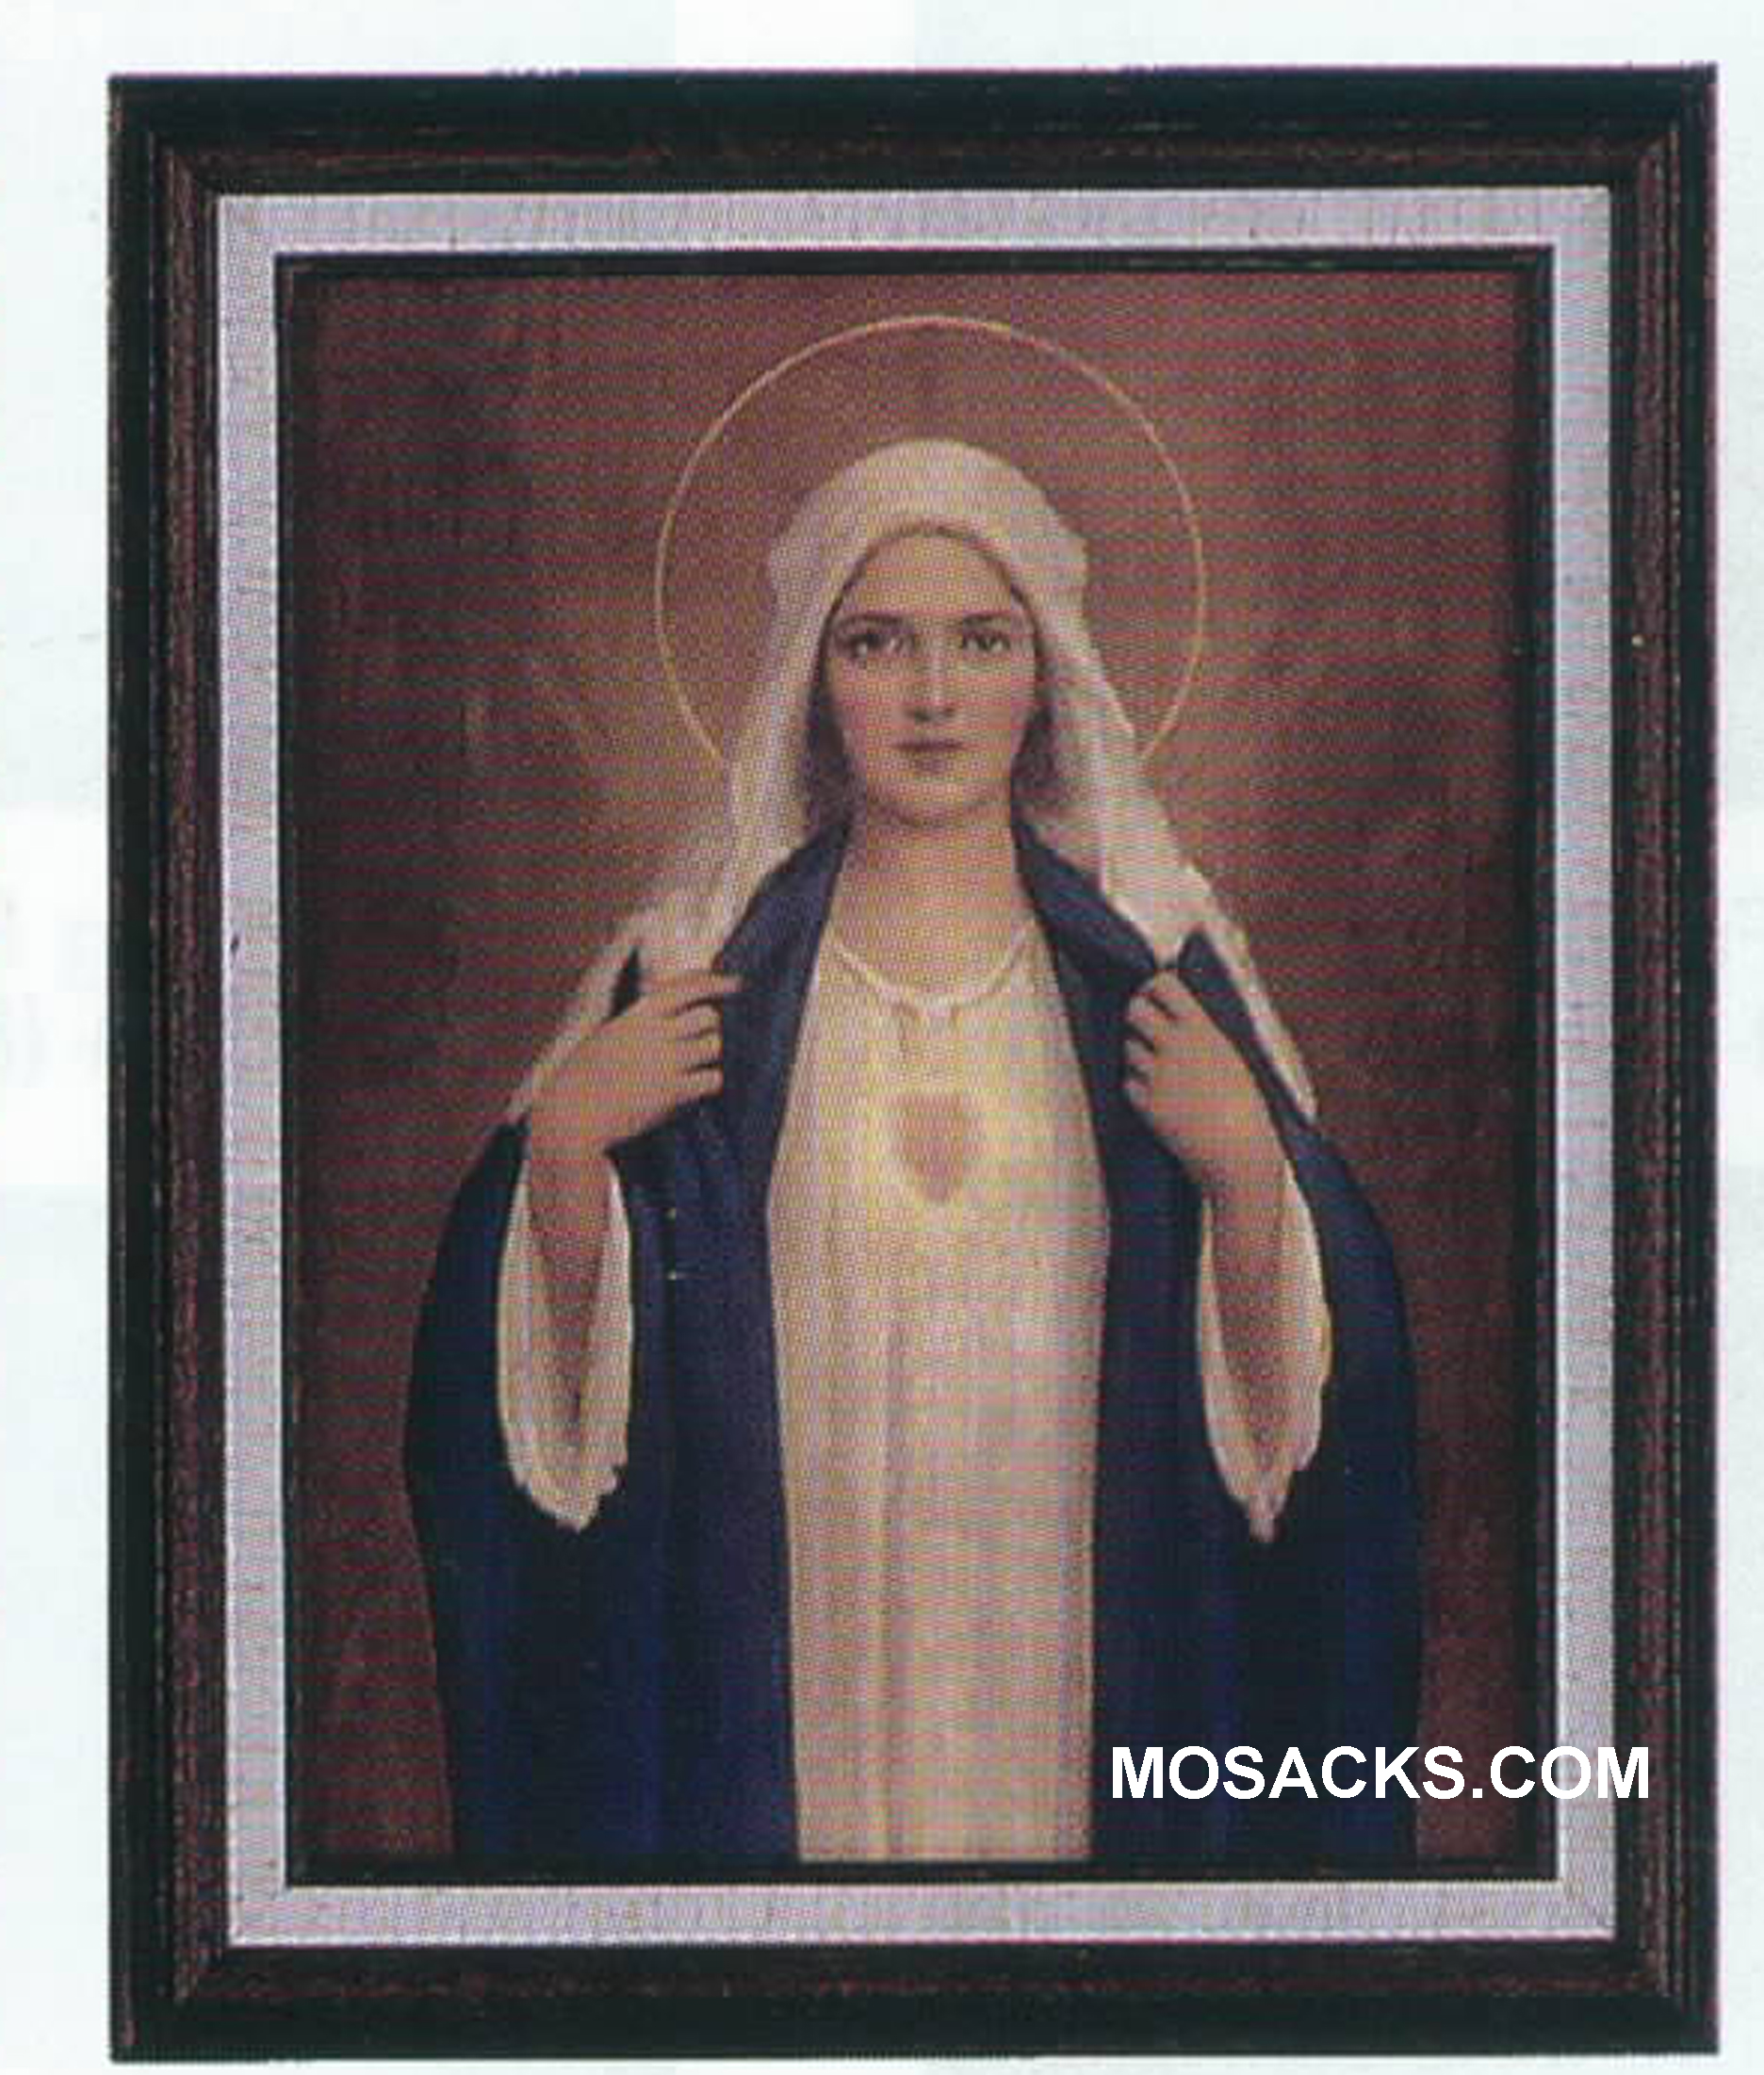 9" x 12" Immaculate Heart of Mary print by Chambers  Immaculate Heart of Mary picture Overall size is 11" x 14"  280-0952